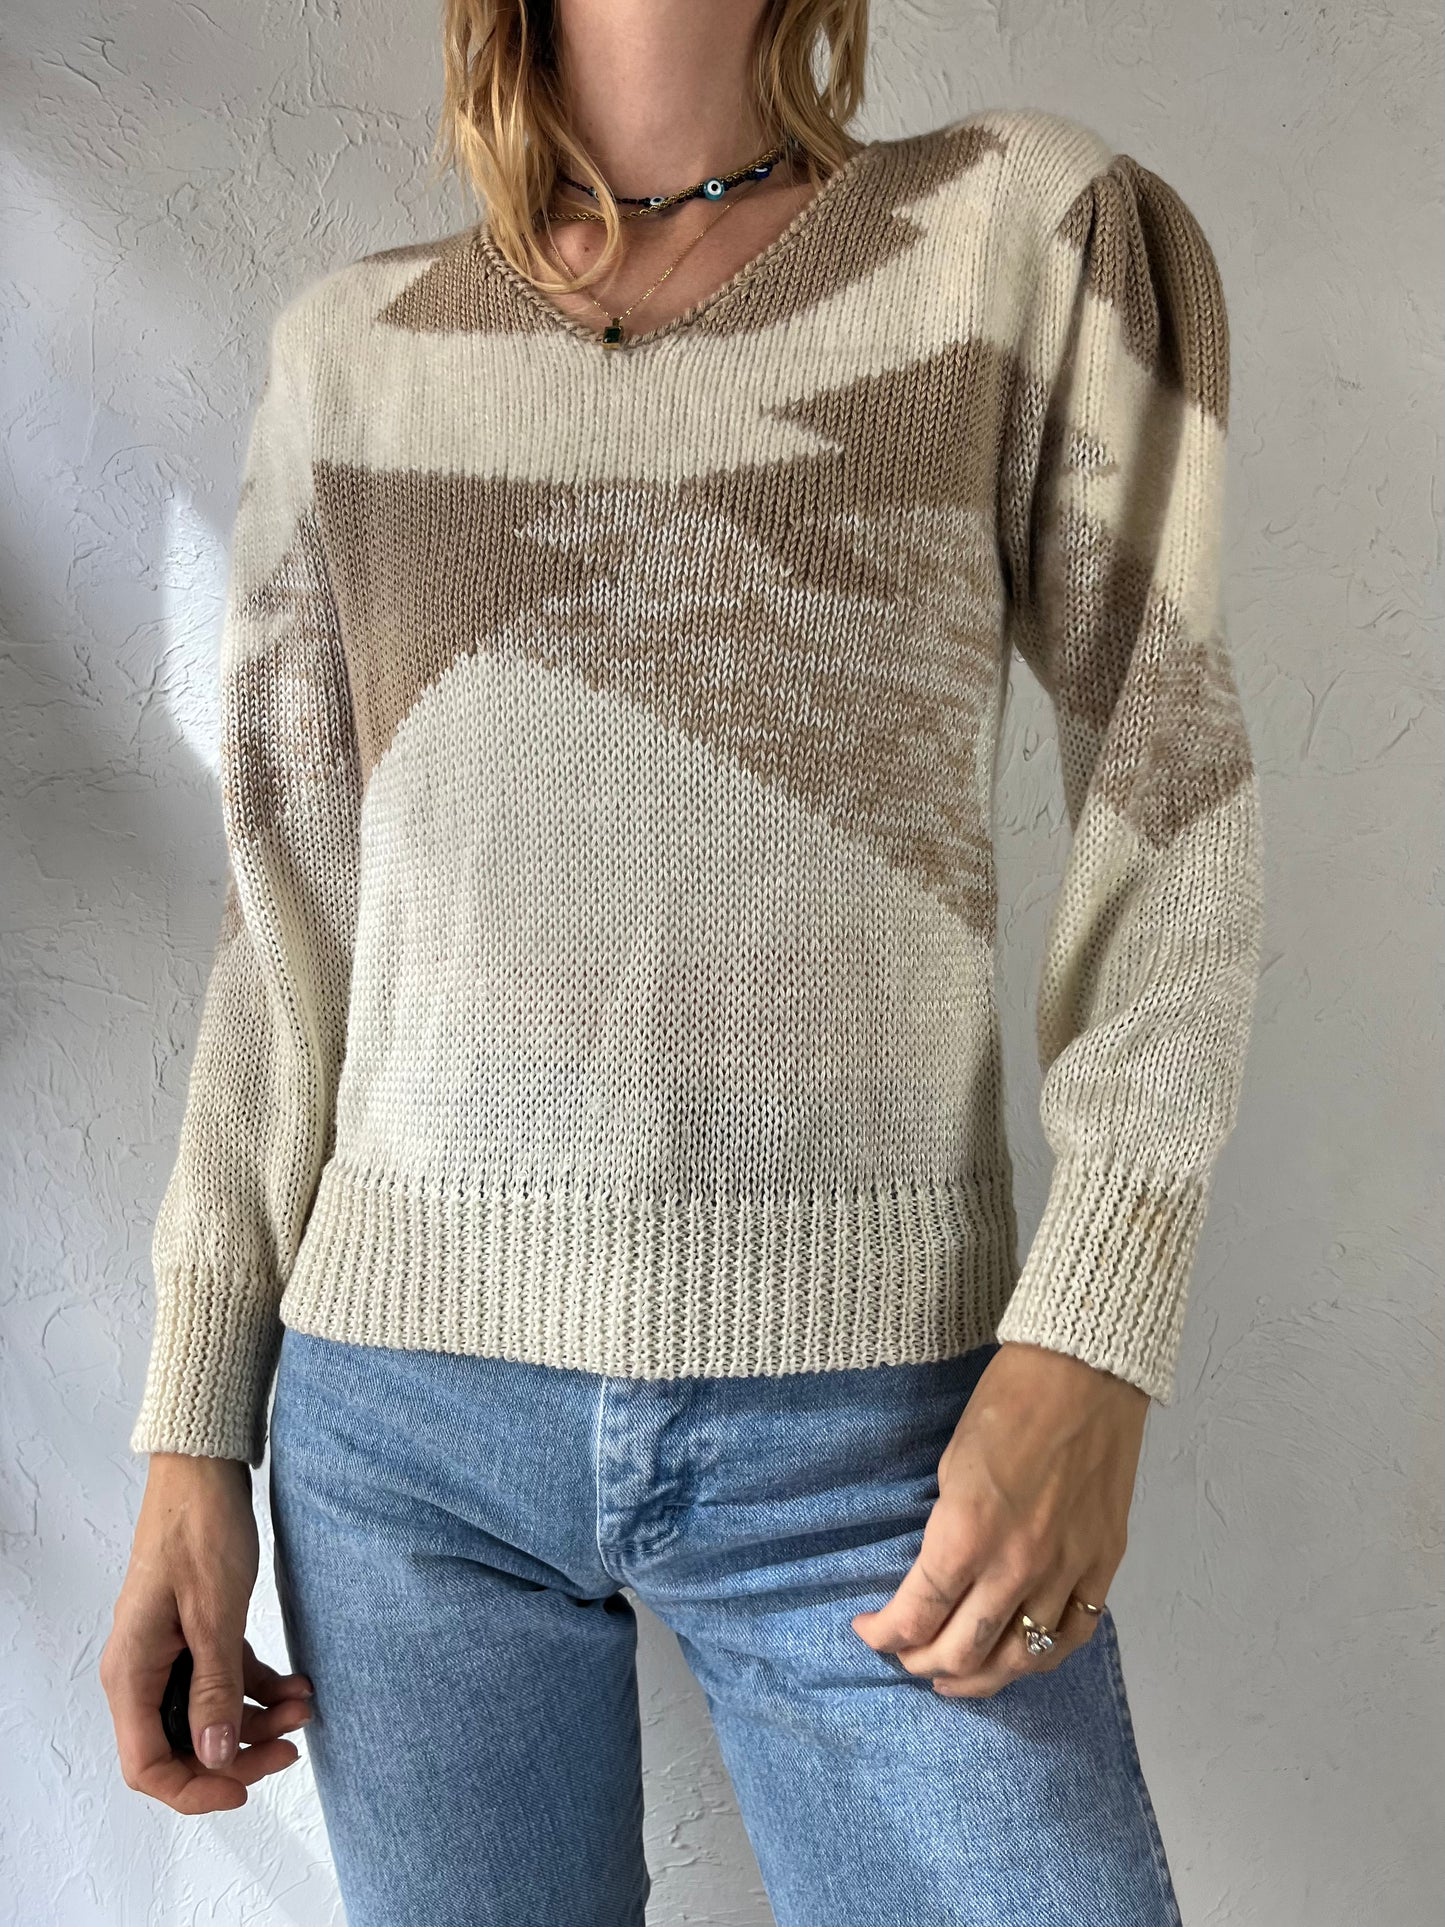 90s 'Woodwards' Beige and White Knit Sweater / Small